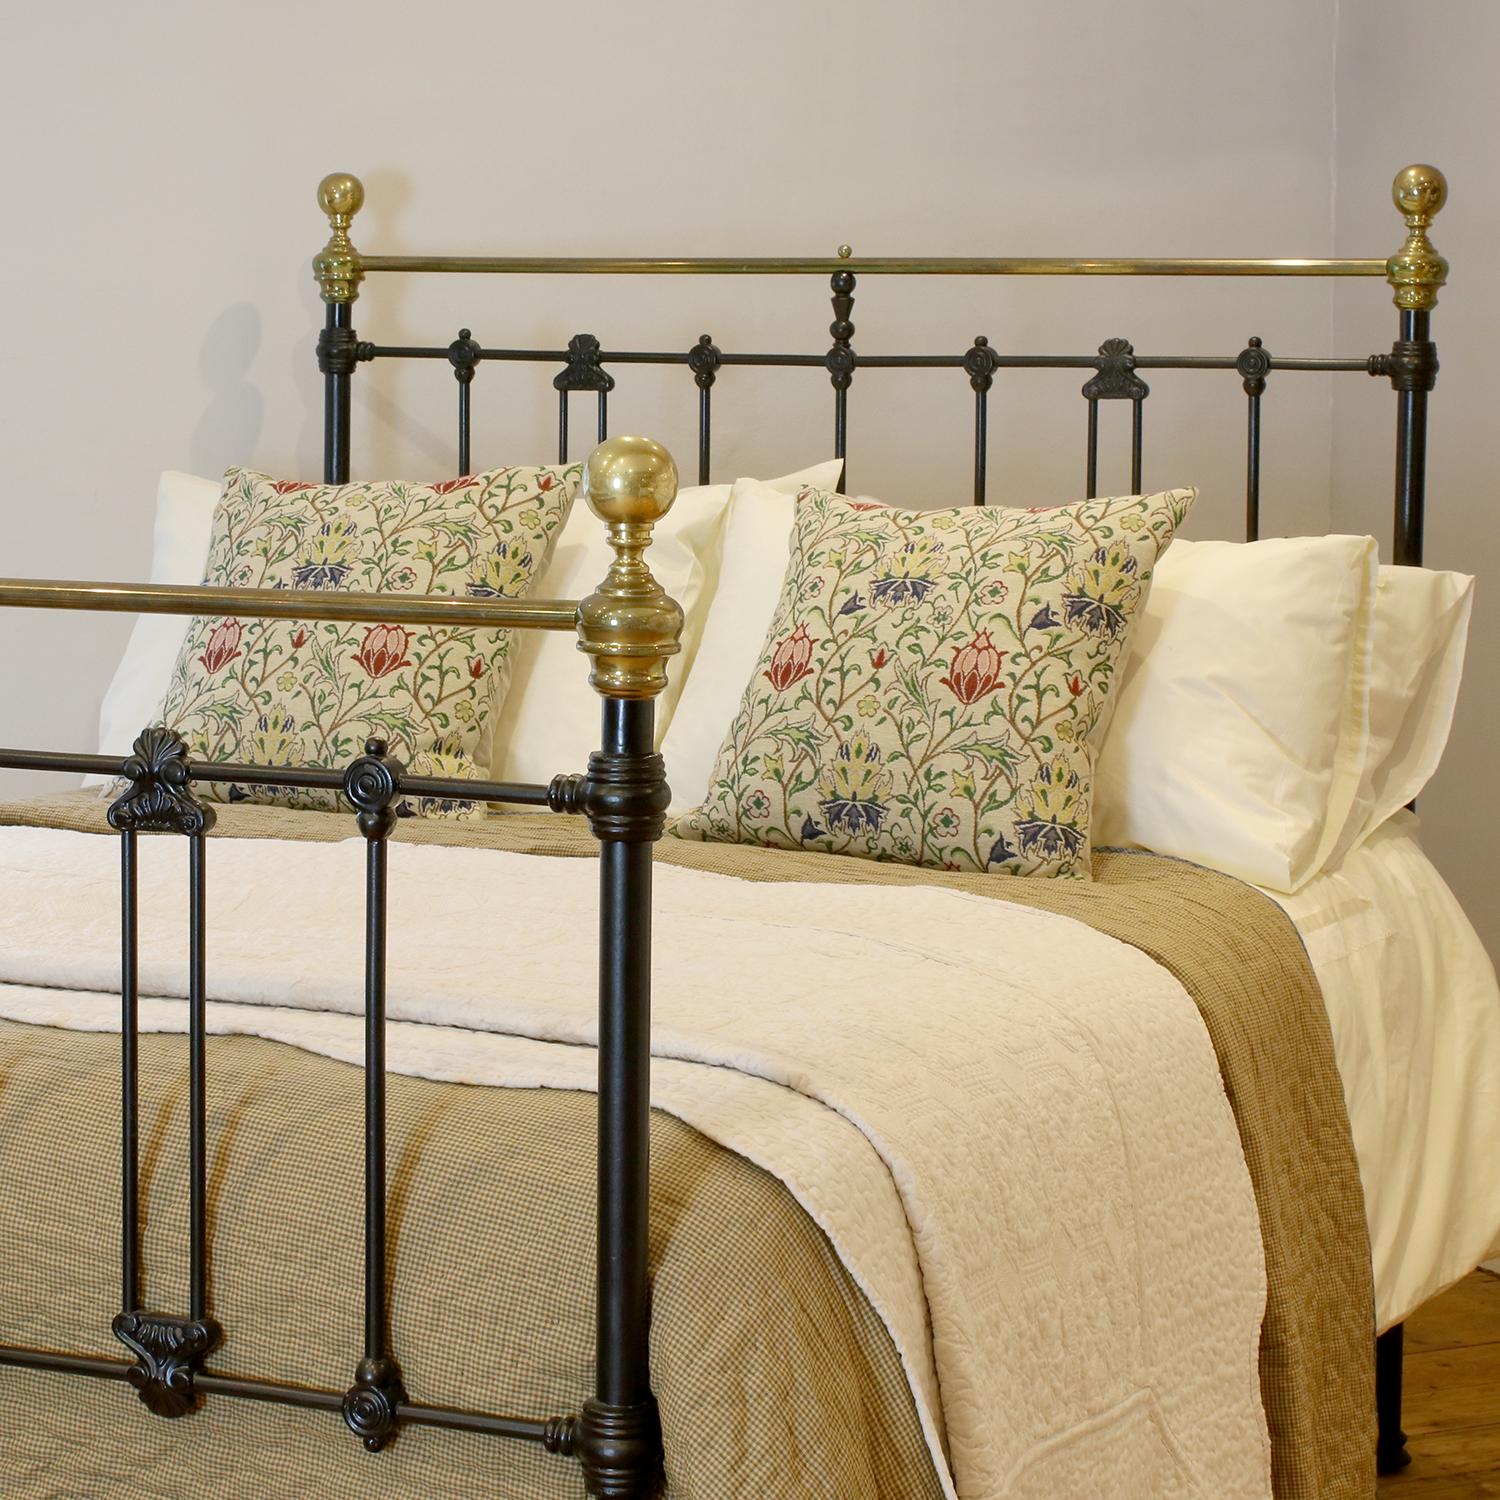 Late Victorian antique brass and iron bed with decorative cast iron mouldings, finished in black, with straight brass top rail and round knobs. 

This bed accepts a double size 4ft 6in wide (54 inch or 135cm) base and mattress.

The price